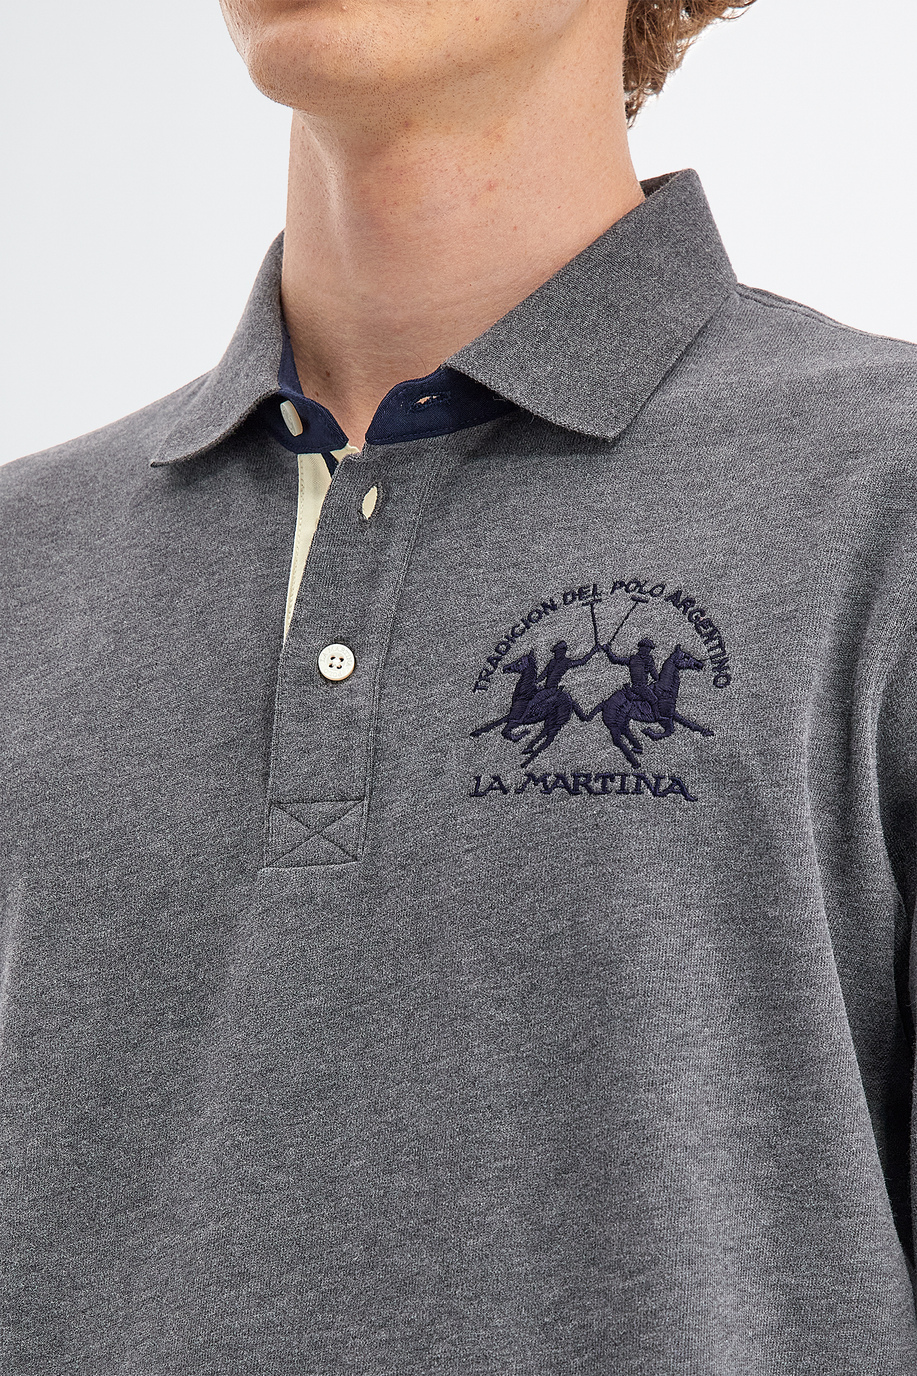 Men’s polo shirt in cotton jersey long sleeves slim fit - Gifts under €150 for him | La Martina - Official Online Shop